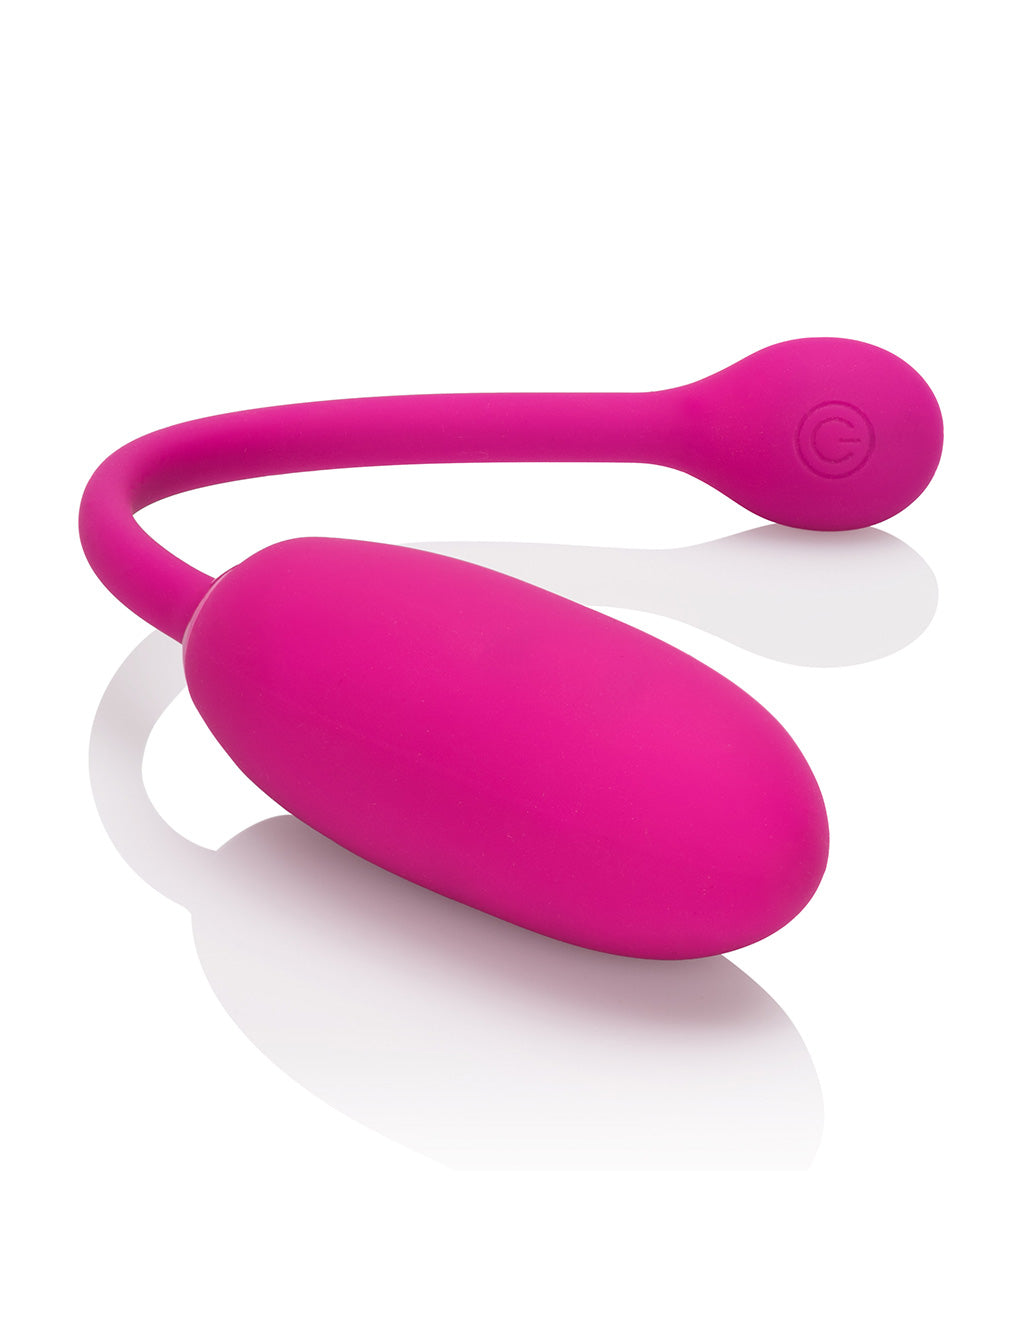 Rechargeable Advanced Vibrating Kegel Ball- Laying down